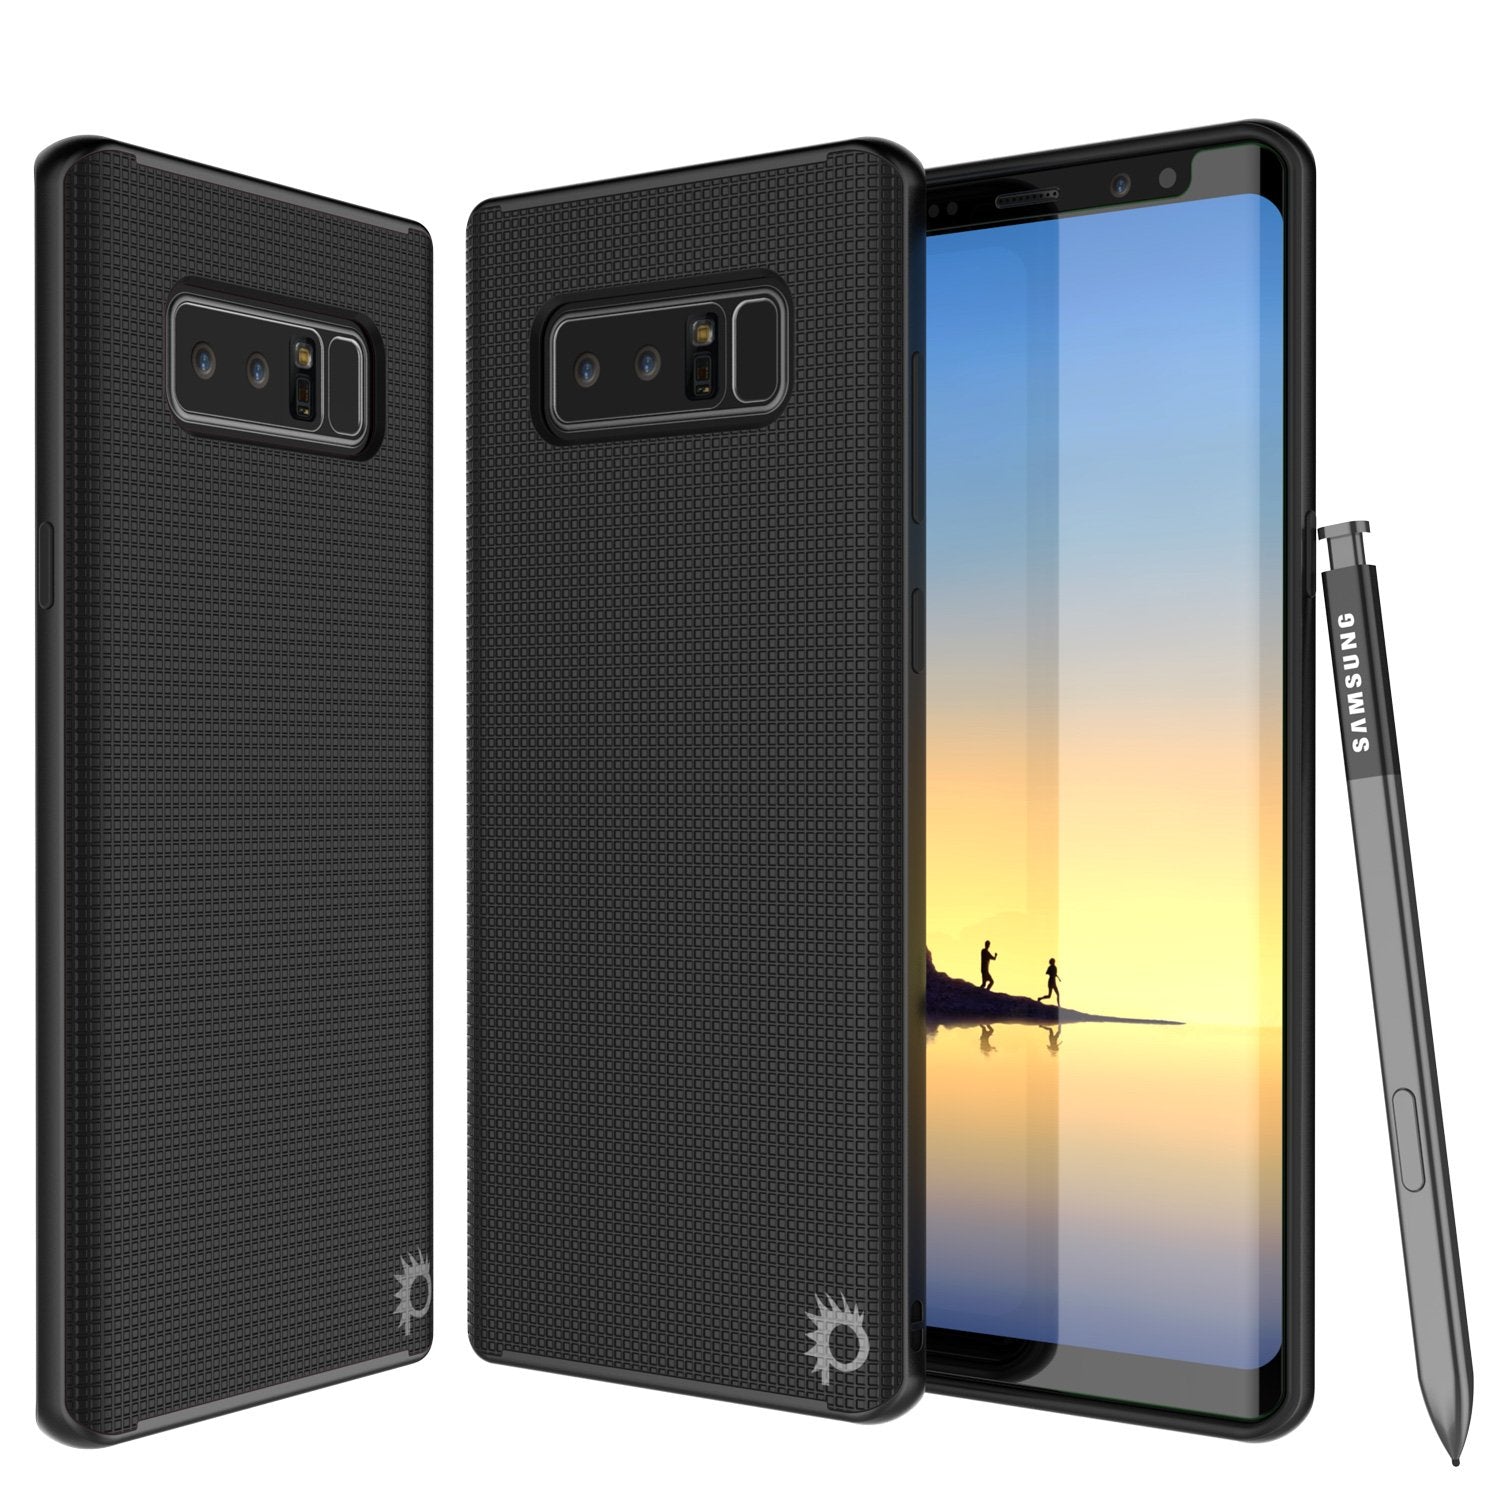 Galaxy Note 8 Case, PunkCase [Stealth Series] Hybrid 3-Piece Shockproof Dual Layer Cover [Non-Slip] [Soft TPU + PC Bumper] with PUNKSHIELD Screen Protector for Samsung Note 8 [Black] - PunkCase NZ